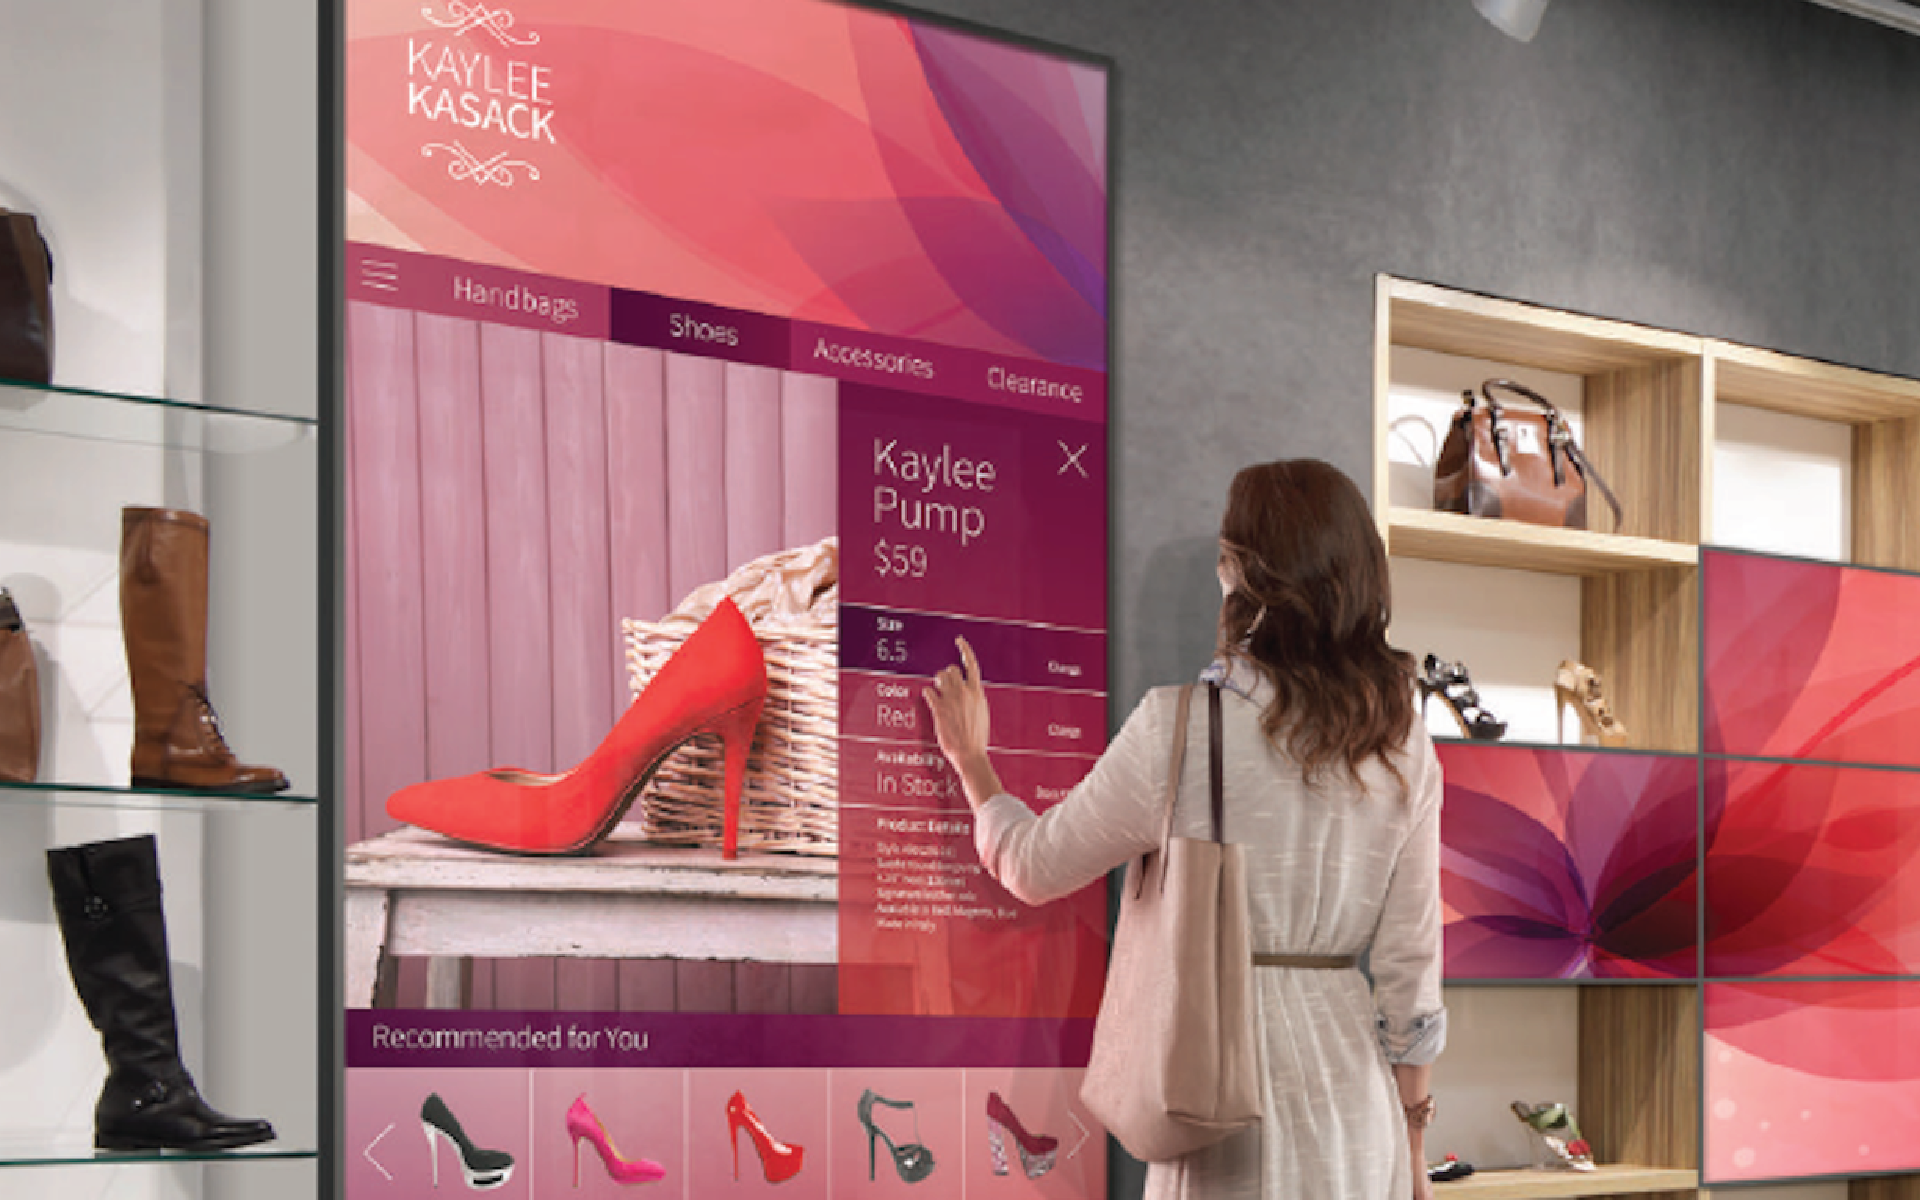 Building interactive experiences in retail banner image